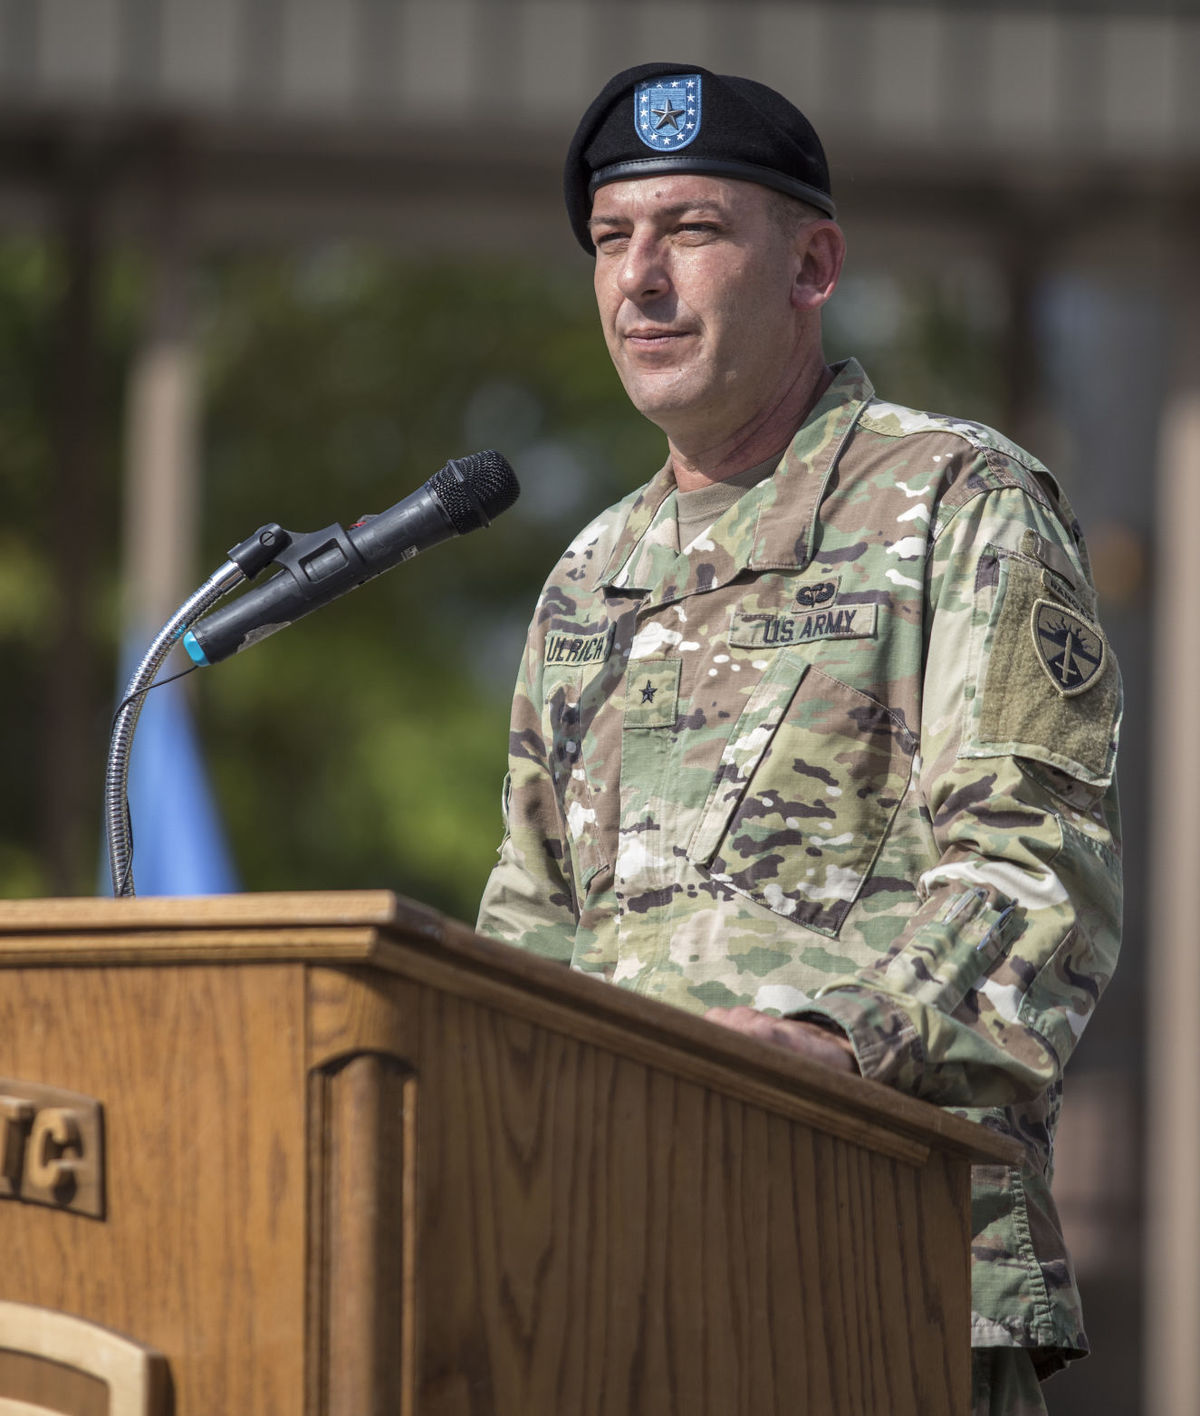 Brig. Gen. John Ulrich speaks during the U.S. Army Operational Testers' Hall of Fame ceremony Friday during the 24th Annual Induction Ceremony on Fort Hood. (Photo Credit: Eric J. Shelton | Herald)